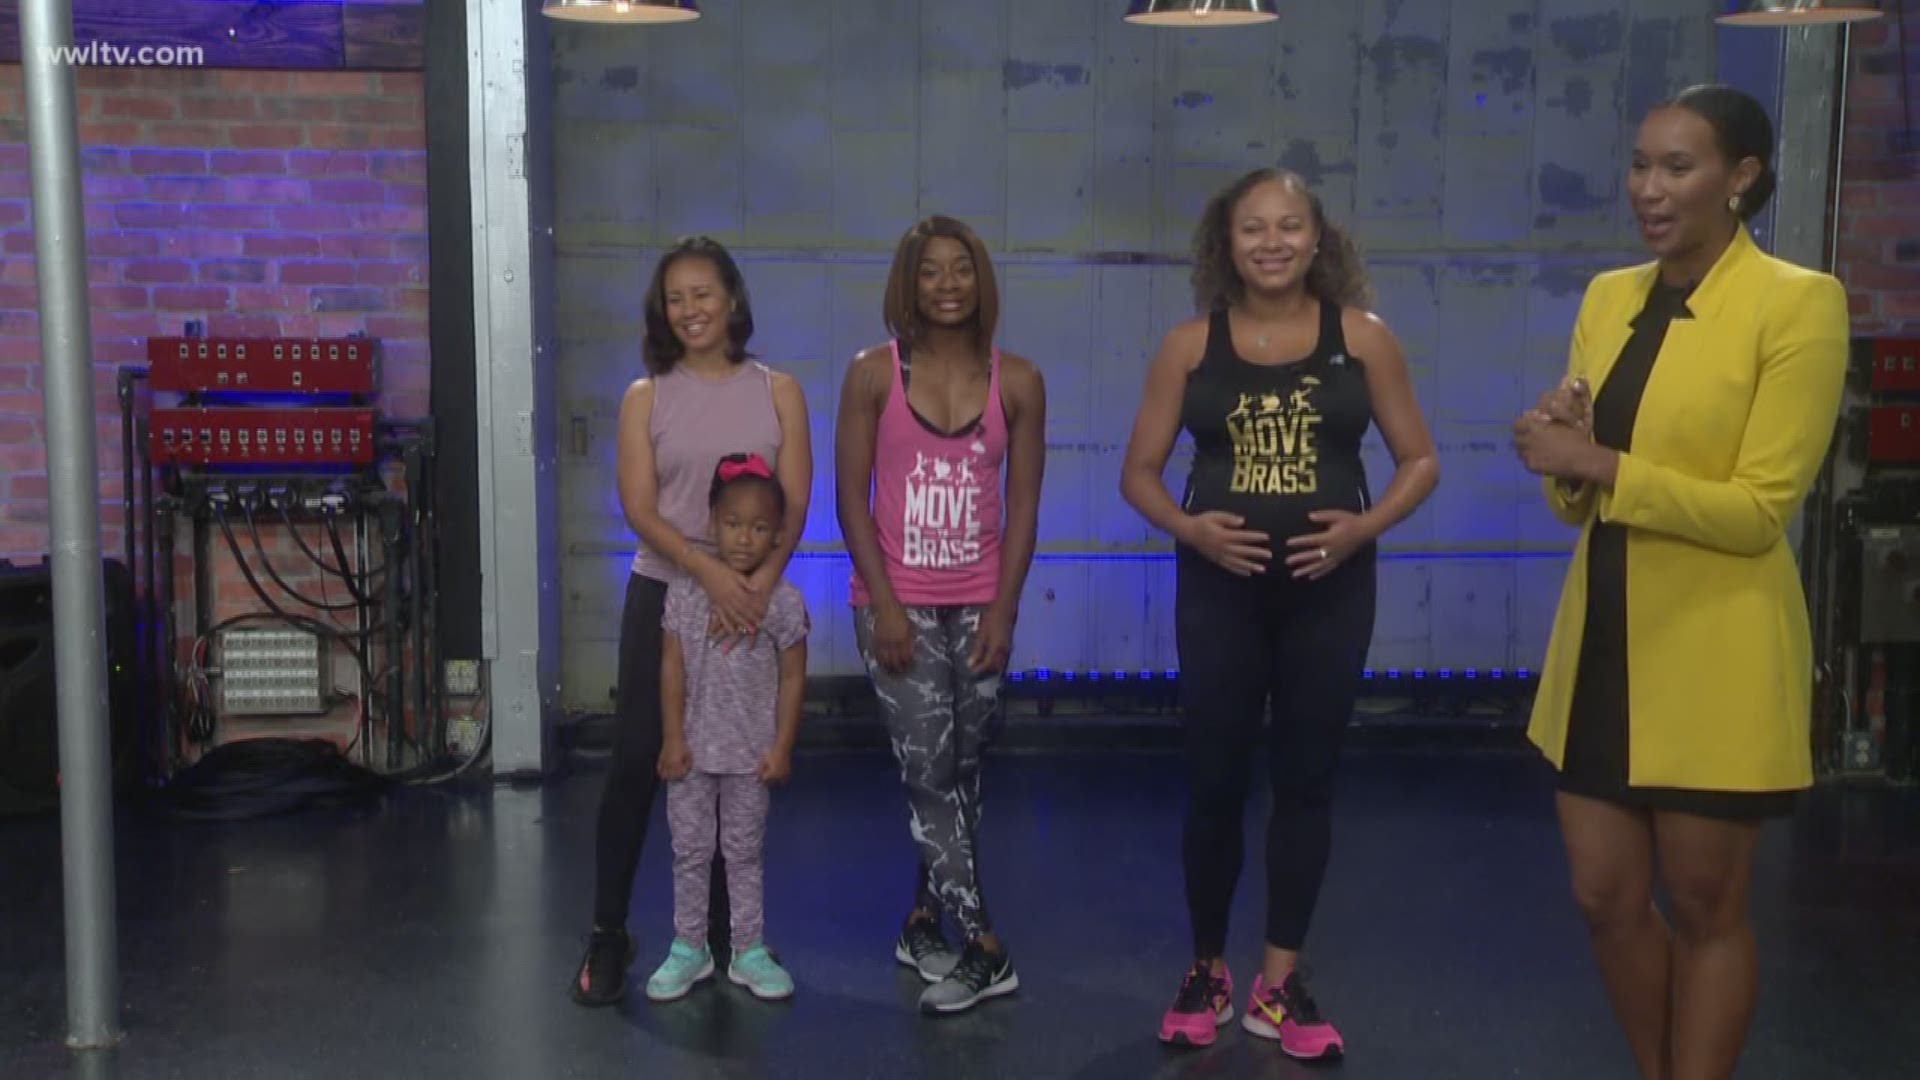 Founder of "Move Ya Brass" Robin Barnes is helping to keep dads, moms and moms-to-be in shape with her new dance fitness class.